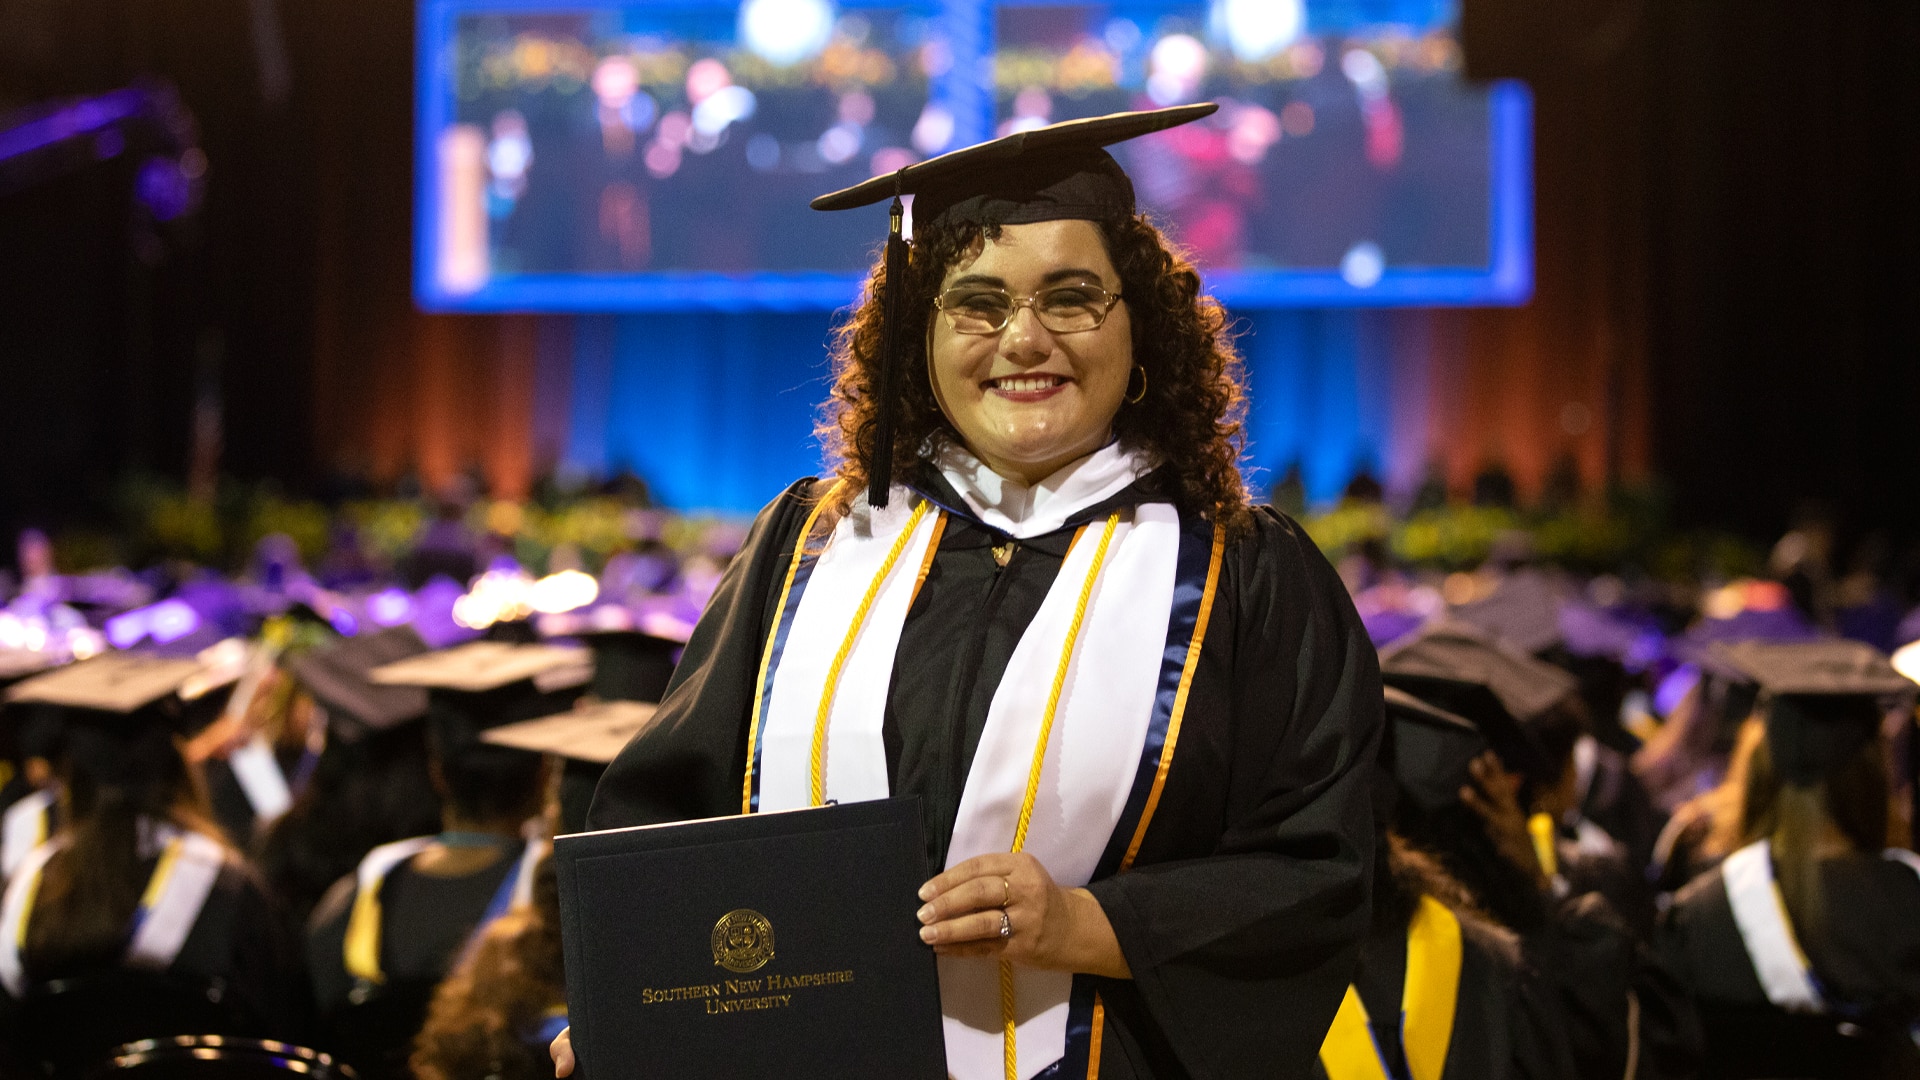 Sarah Childress, in cap and gown, smiling at a recent commencement ceremony at the SNHU arena.